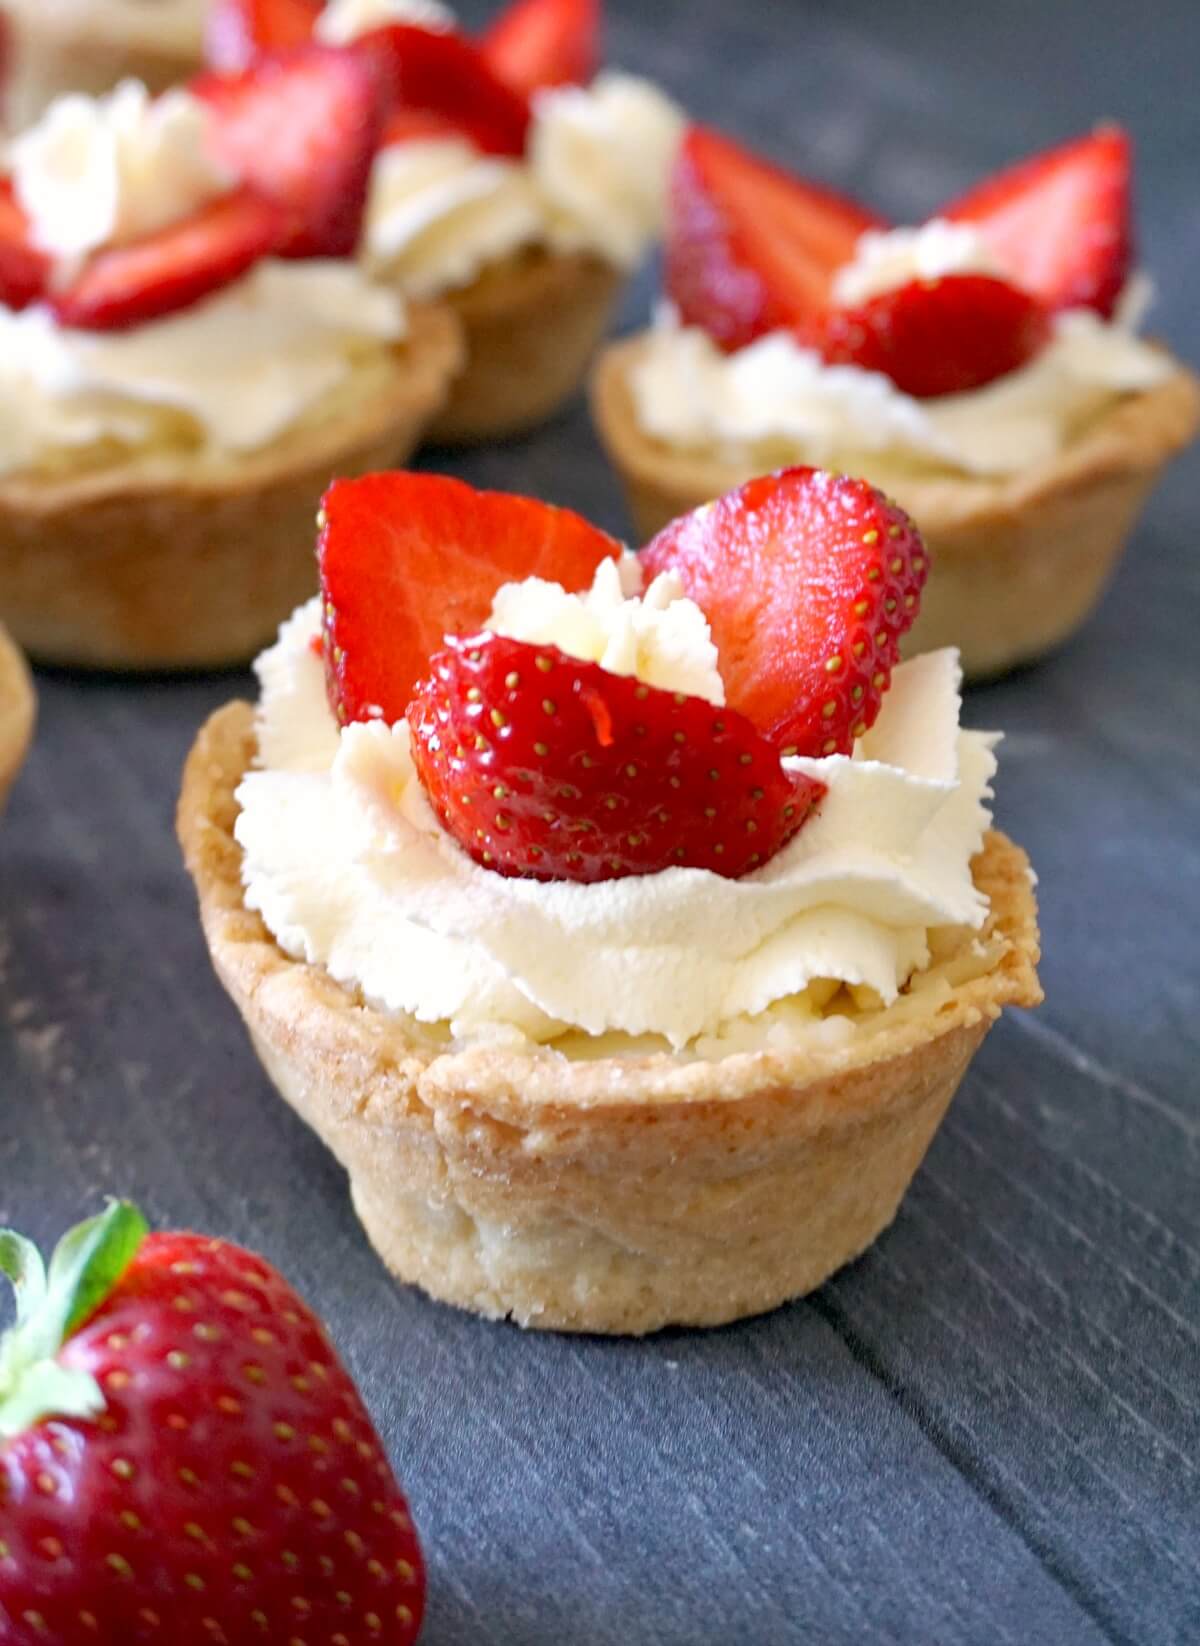 A tartlet with cream and 3 strawberry slices with other tartlets in the background